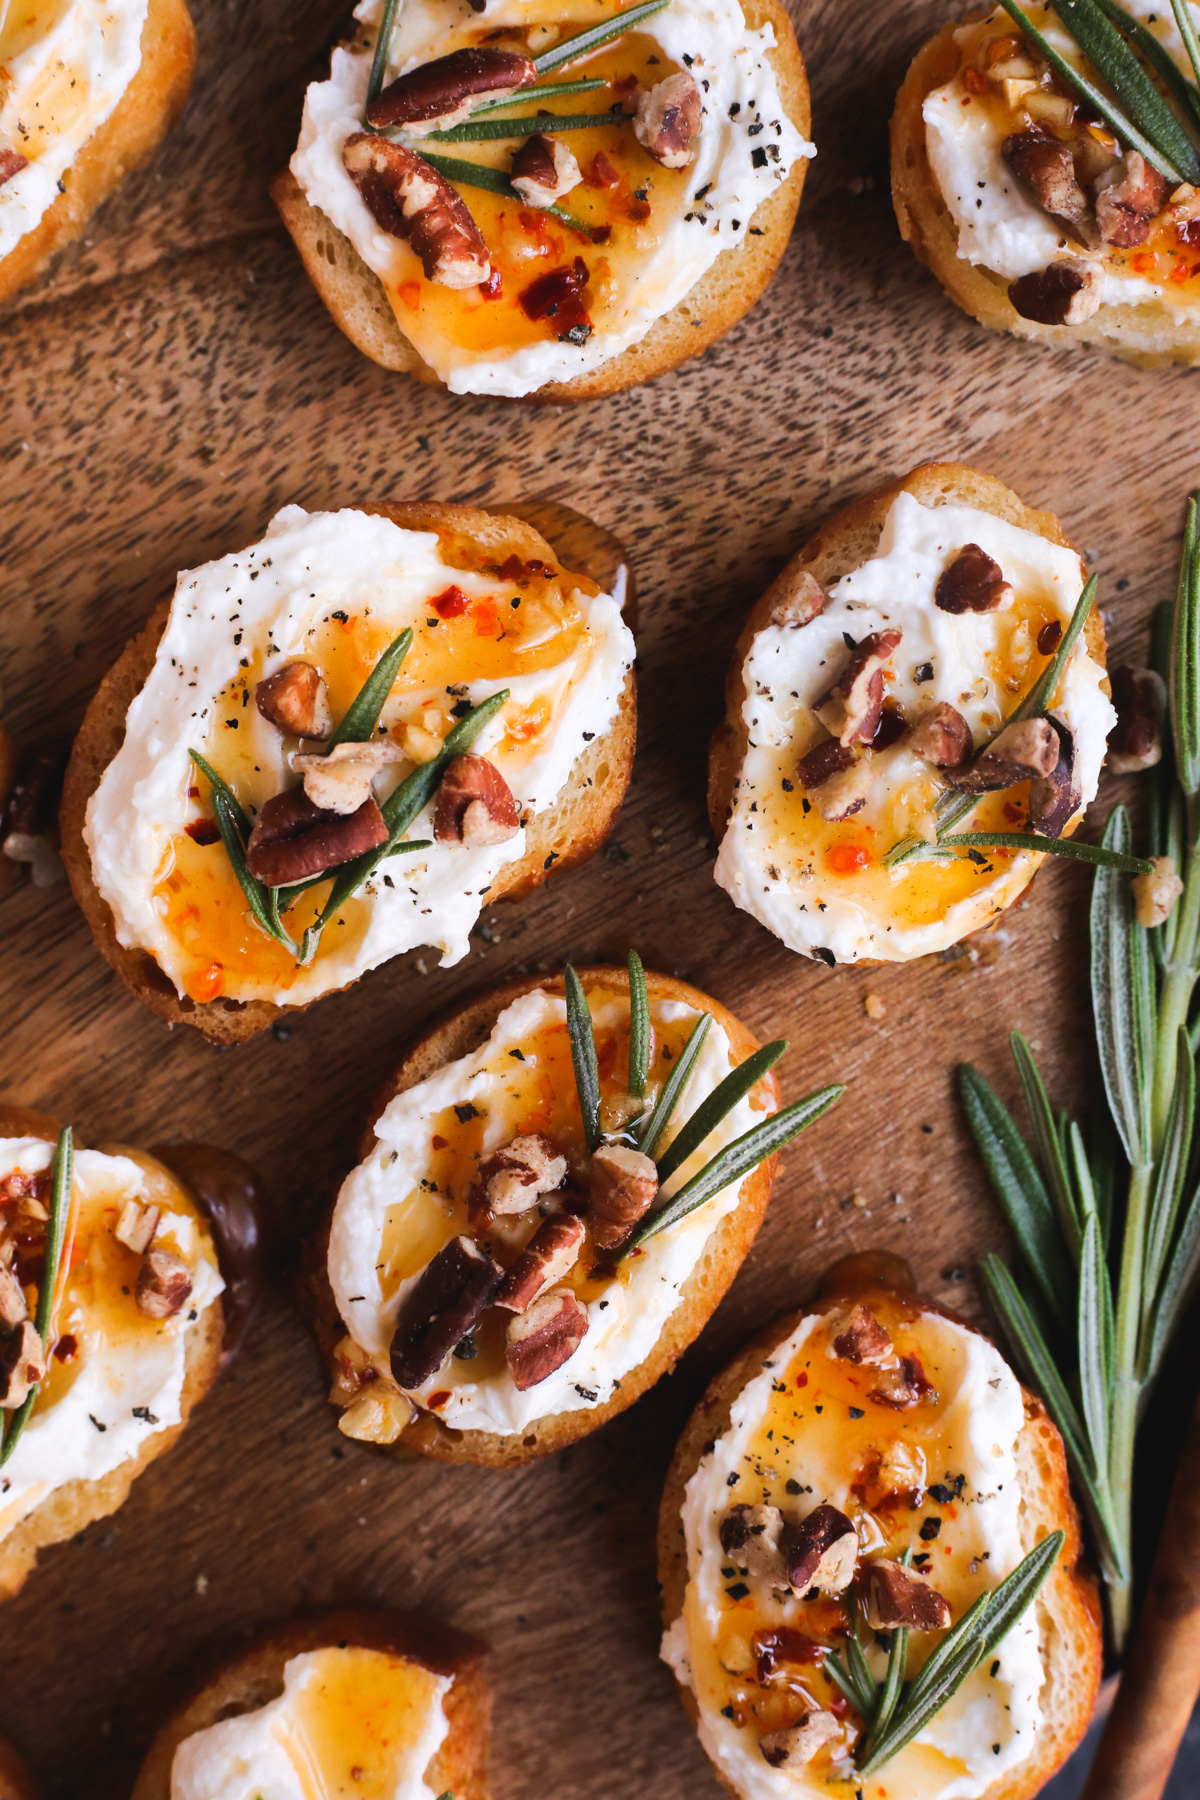 A small, round, toasted crostini is in the center of the photo, displayed on a wooden serving board with more crostinis surrounding it. It's garnished with chopped pecan pieces and fresh rosemary, which stand out against the white feta cheese. A hot honey drizzle and cracked black pepper is also included as a garnish